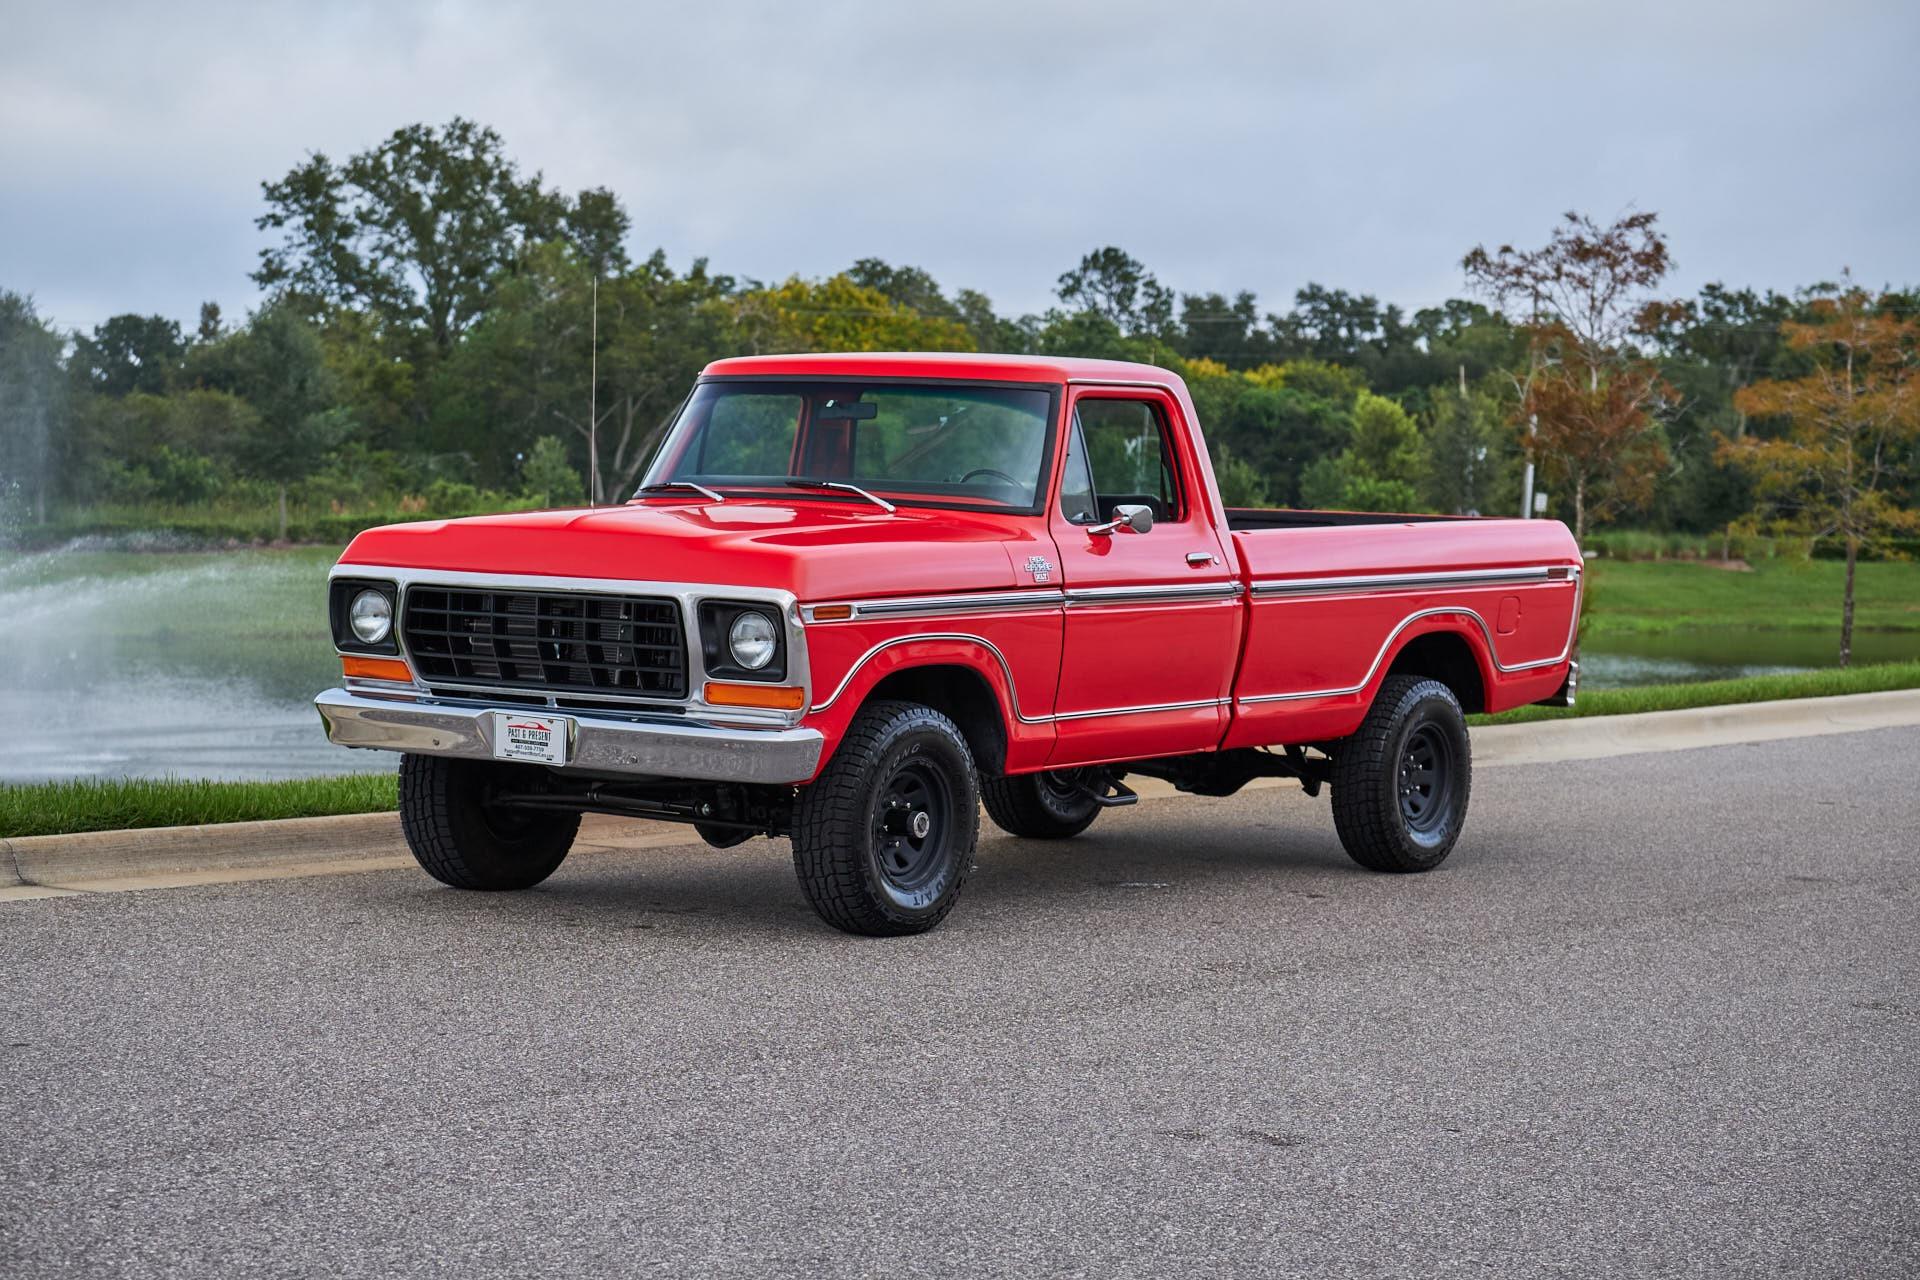 The 1978 Ford F150 4x4 Pickup Restored photos